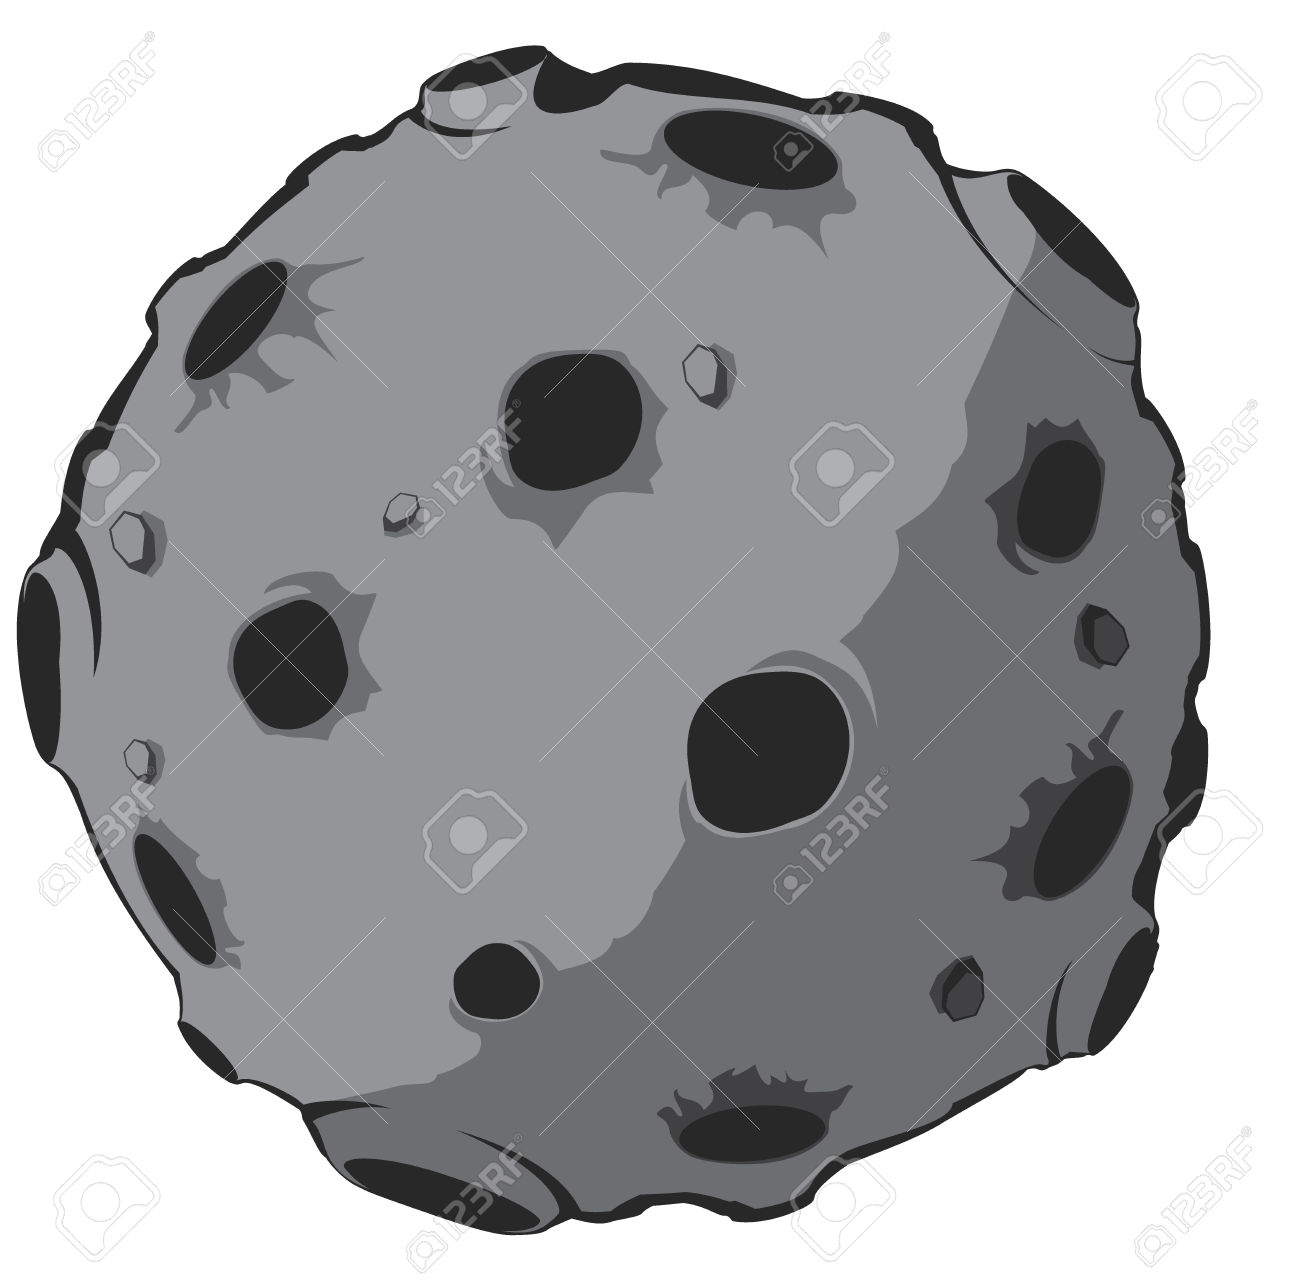 asteroid clipart animated